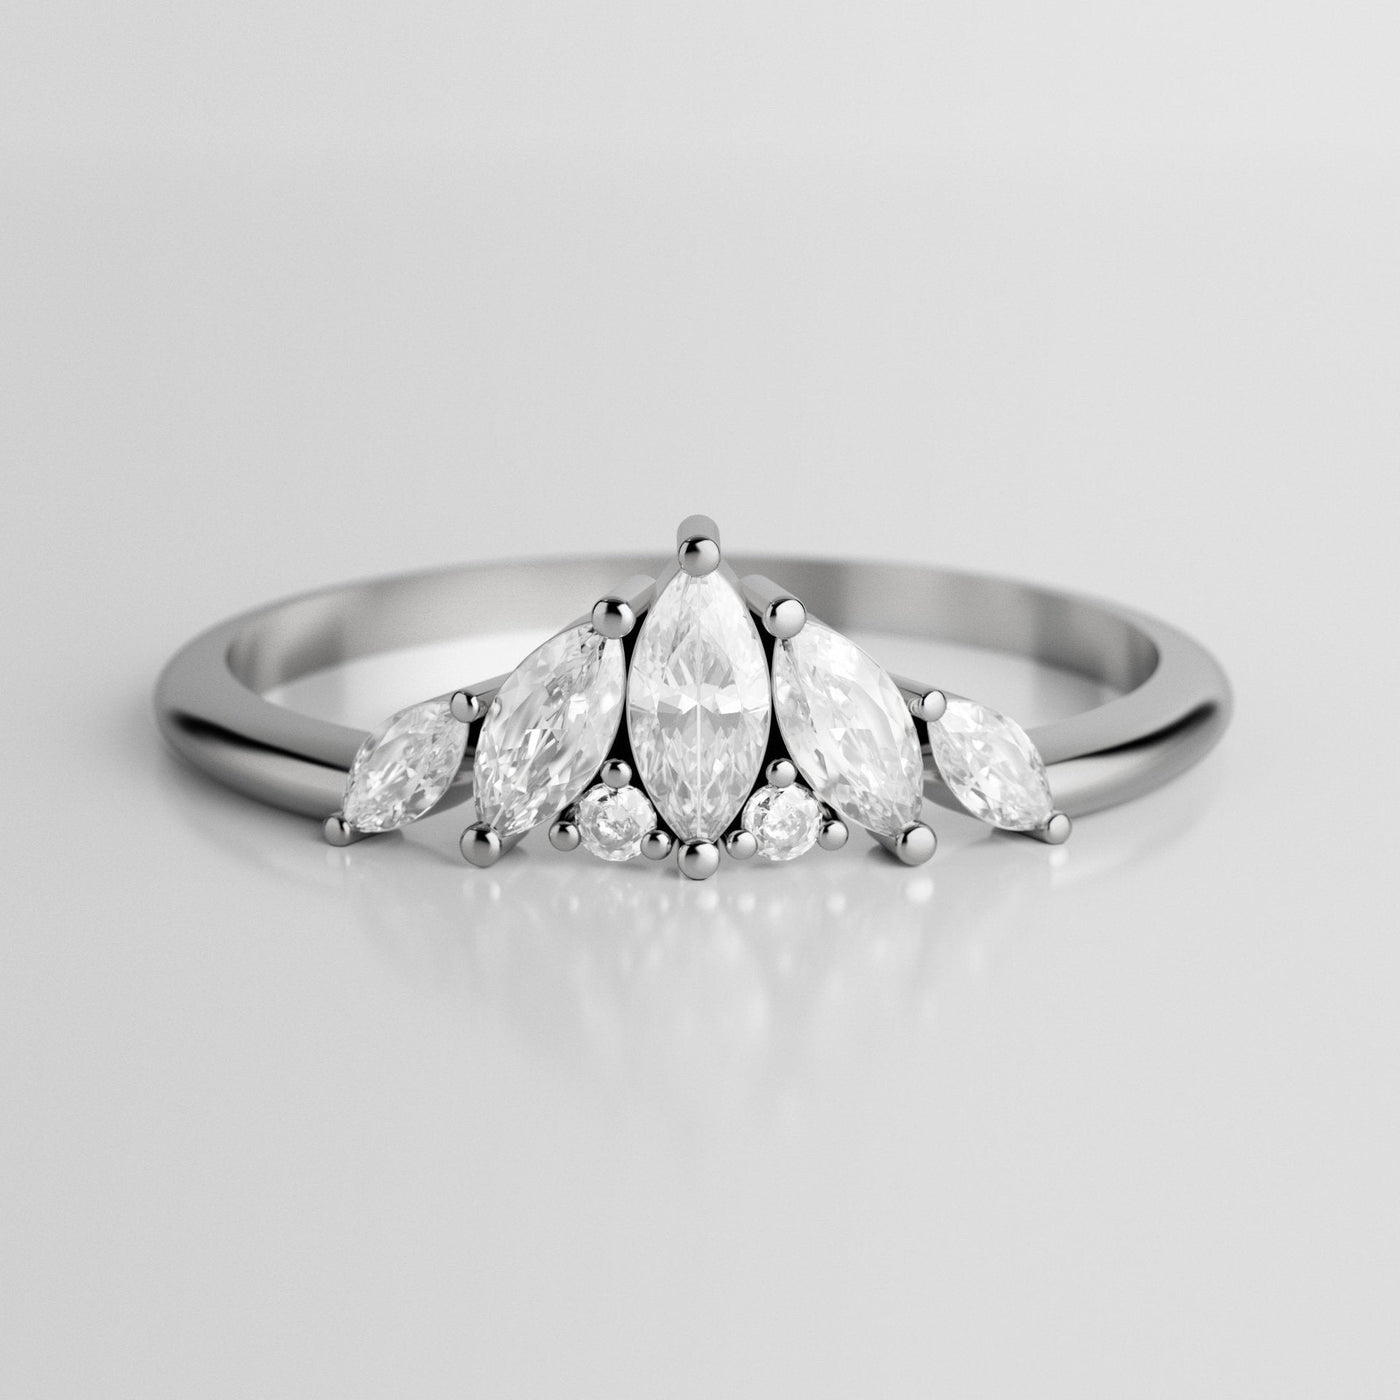 Array of Marquise-Cut White Diamonds resembling an iceberg with smaller White Round Diamonds on an Art Deco inspired Gold Ring